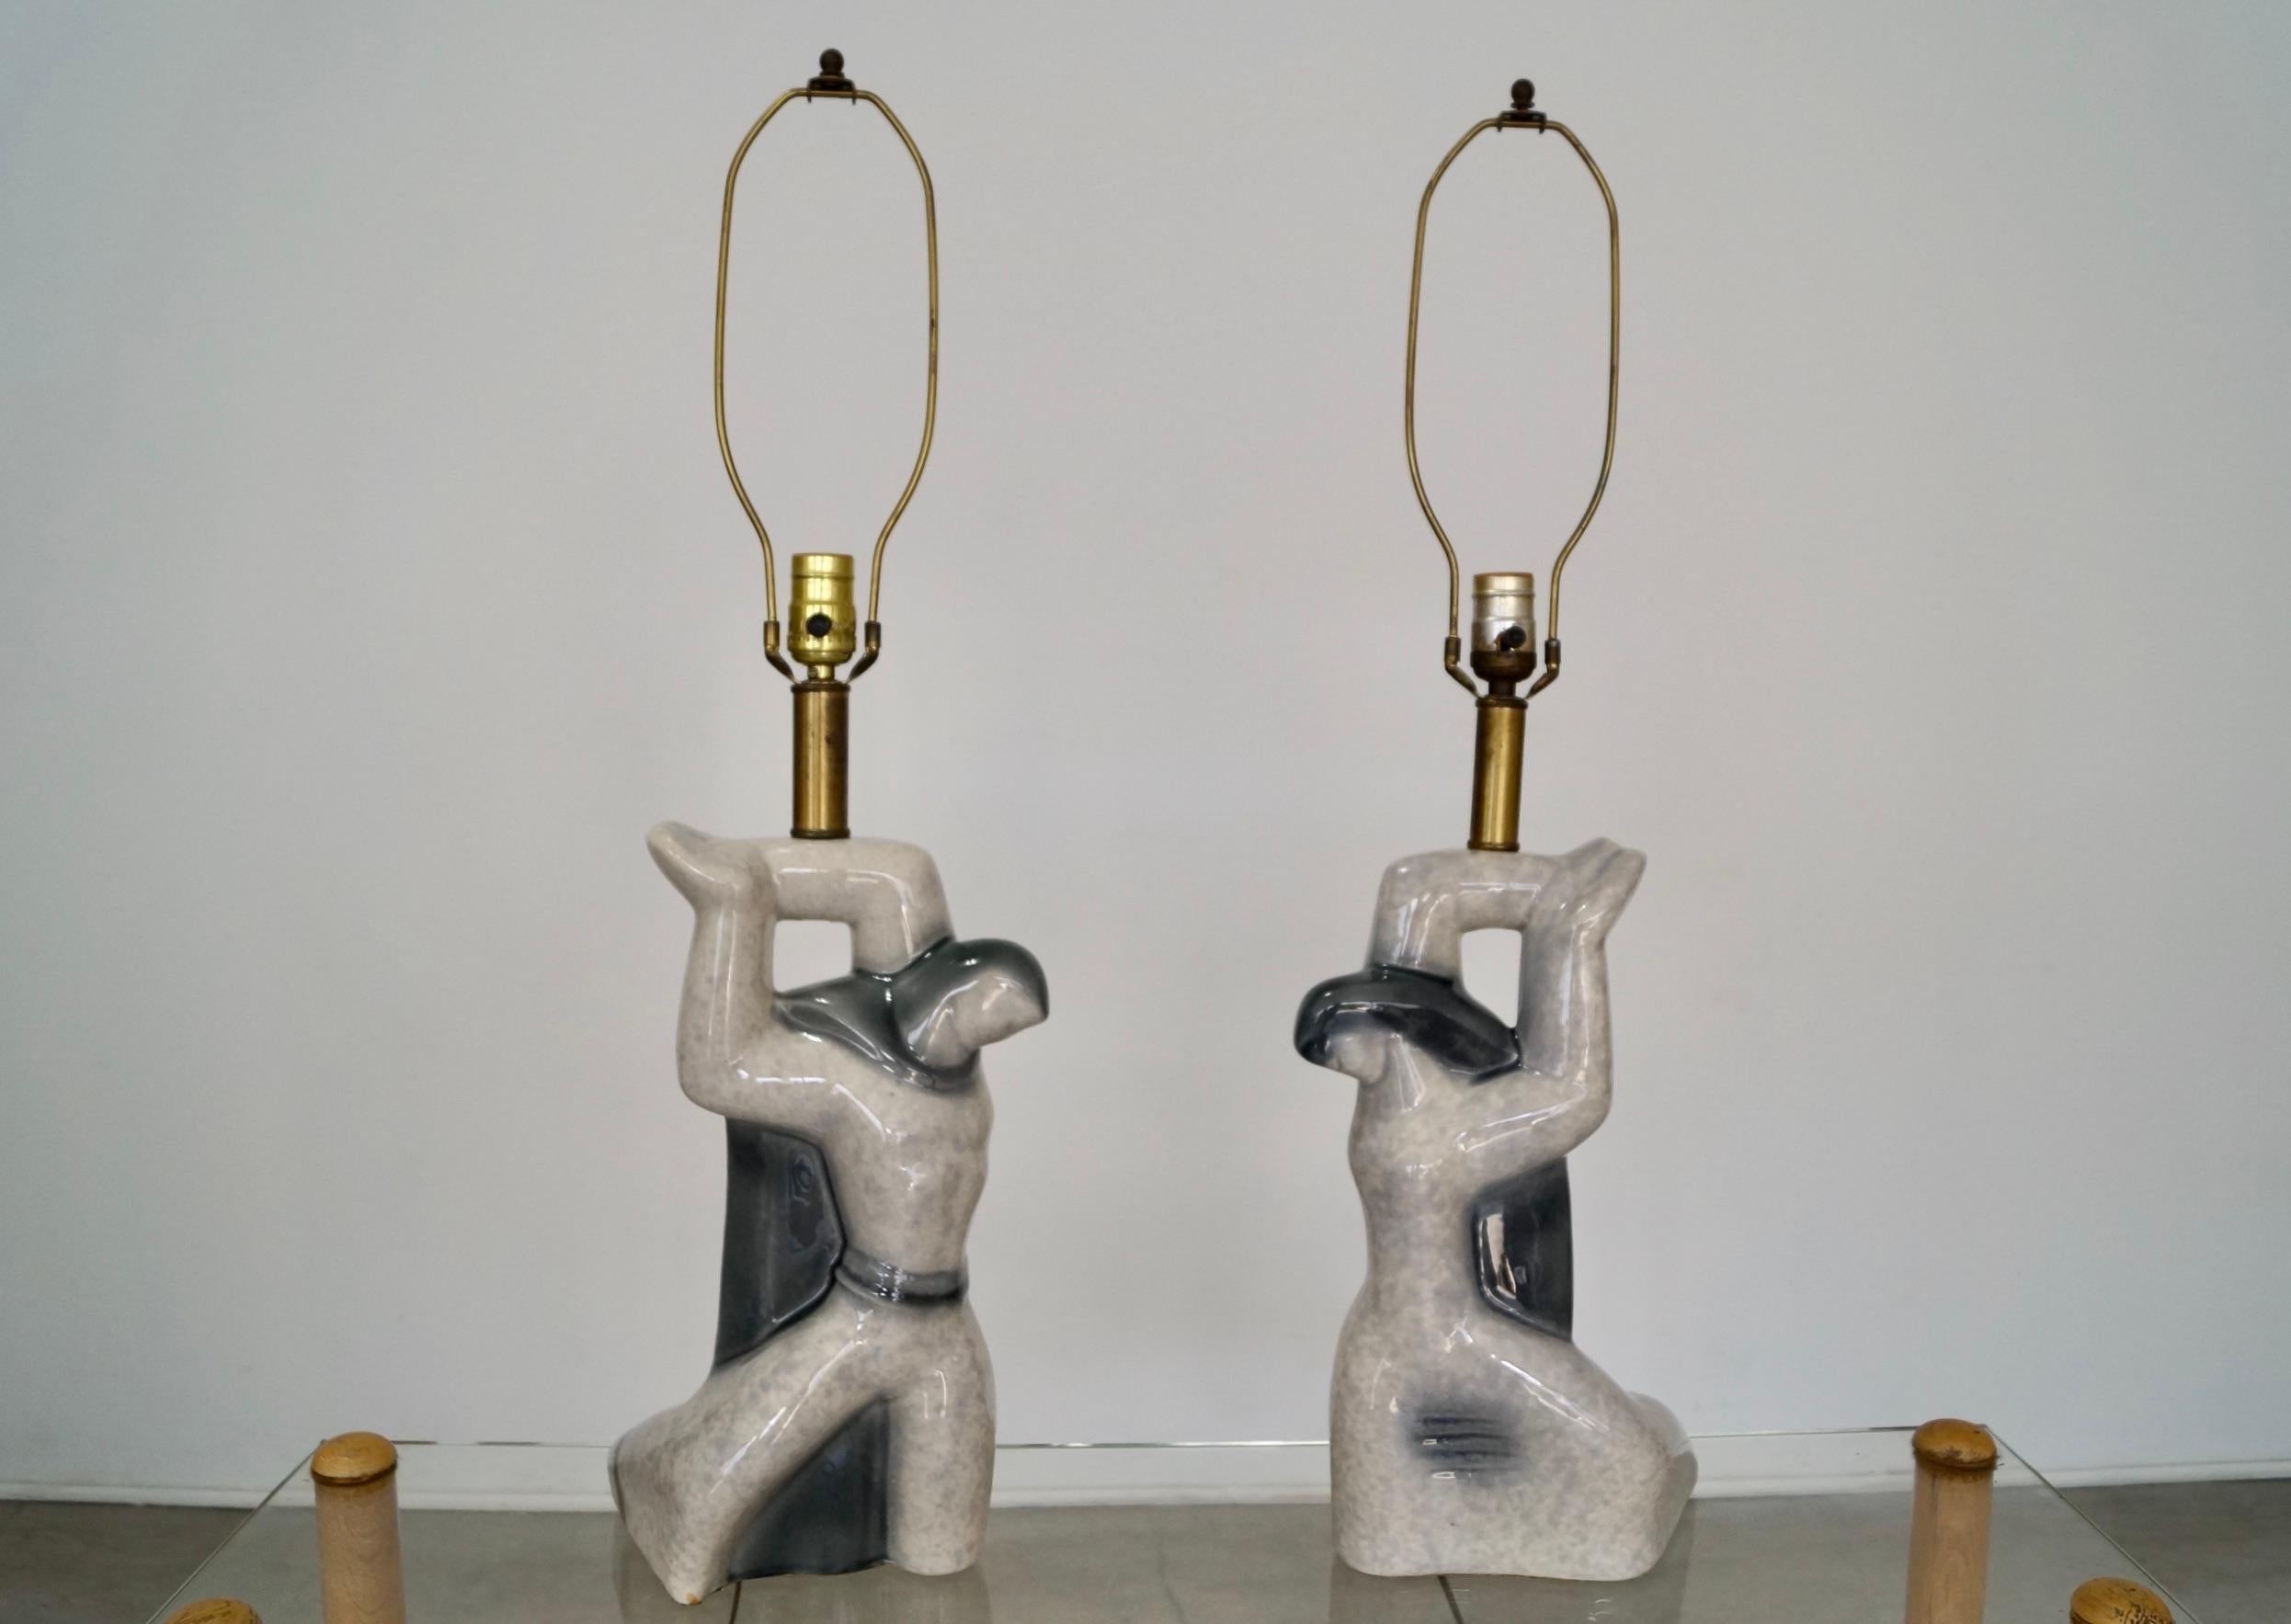 Pair of vintage 1950’s Mid-century Modern table lamps for sale. Manufactured by Heifetz Lighting, and in amazing condition with no chips or cracks. They’re a male and female figures in ceramic, and are a beautiful gray tone. They have darker gray